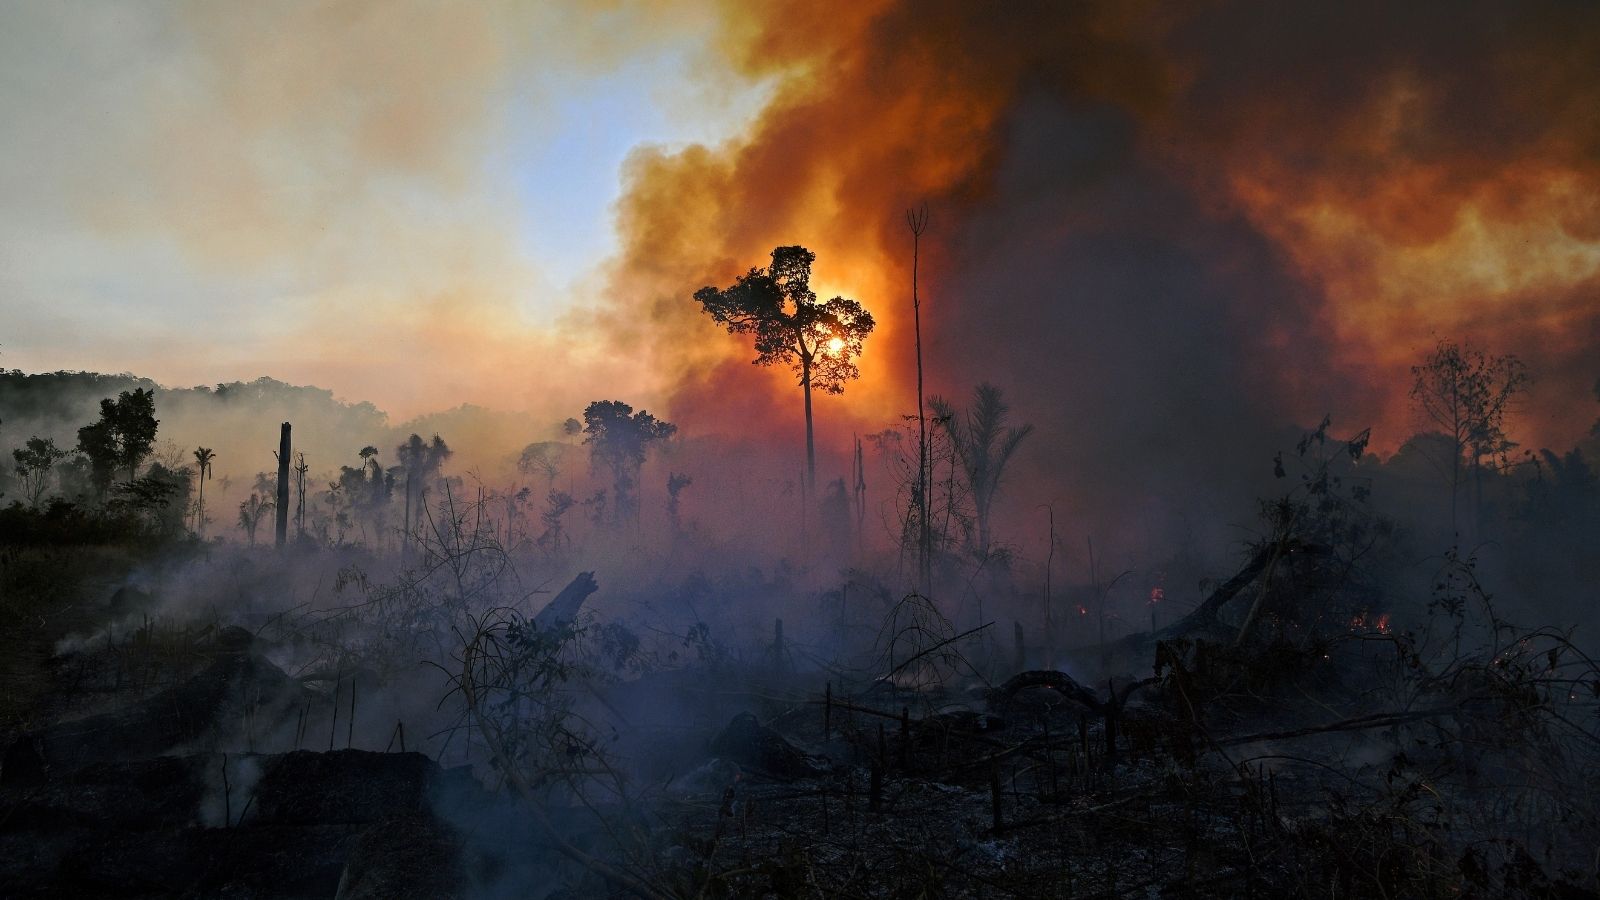 Smoke rises from an illegally lit fire in Amazon rainforest reserve, south of Novo Progresso in Para state, Brazil, on August 15, 2020. (Photo by CARL DE SOUZA / AFP) (Photo by CARL DE SOUZA/AFP via Getty Images)